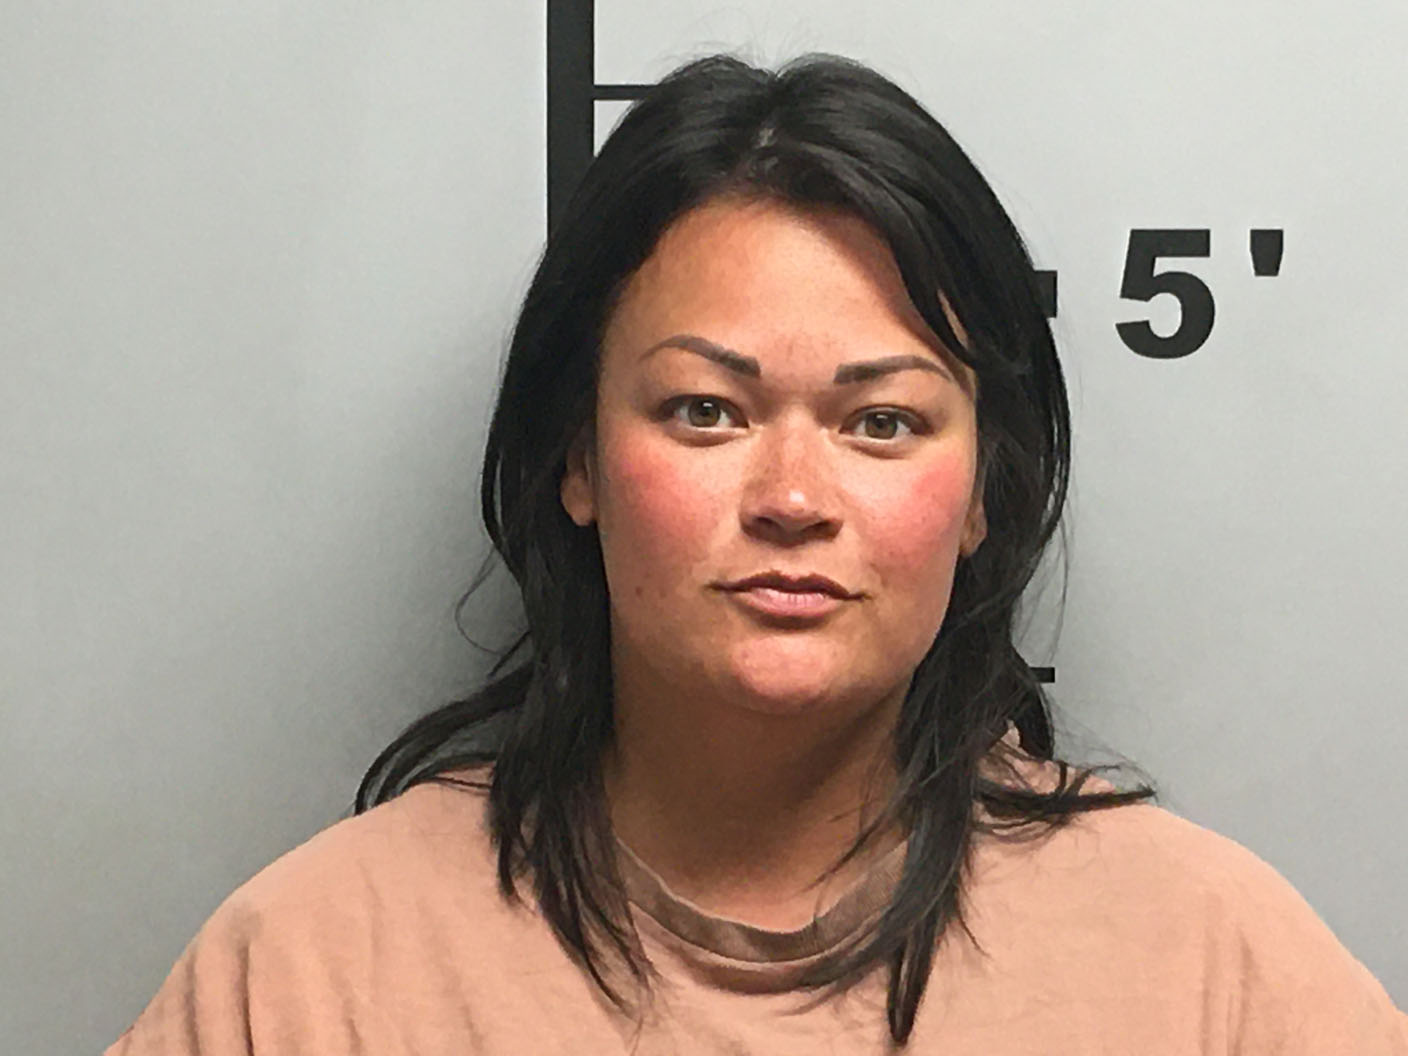 Rogers woman arrested, accused of having sex with 15-year-old photo picture